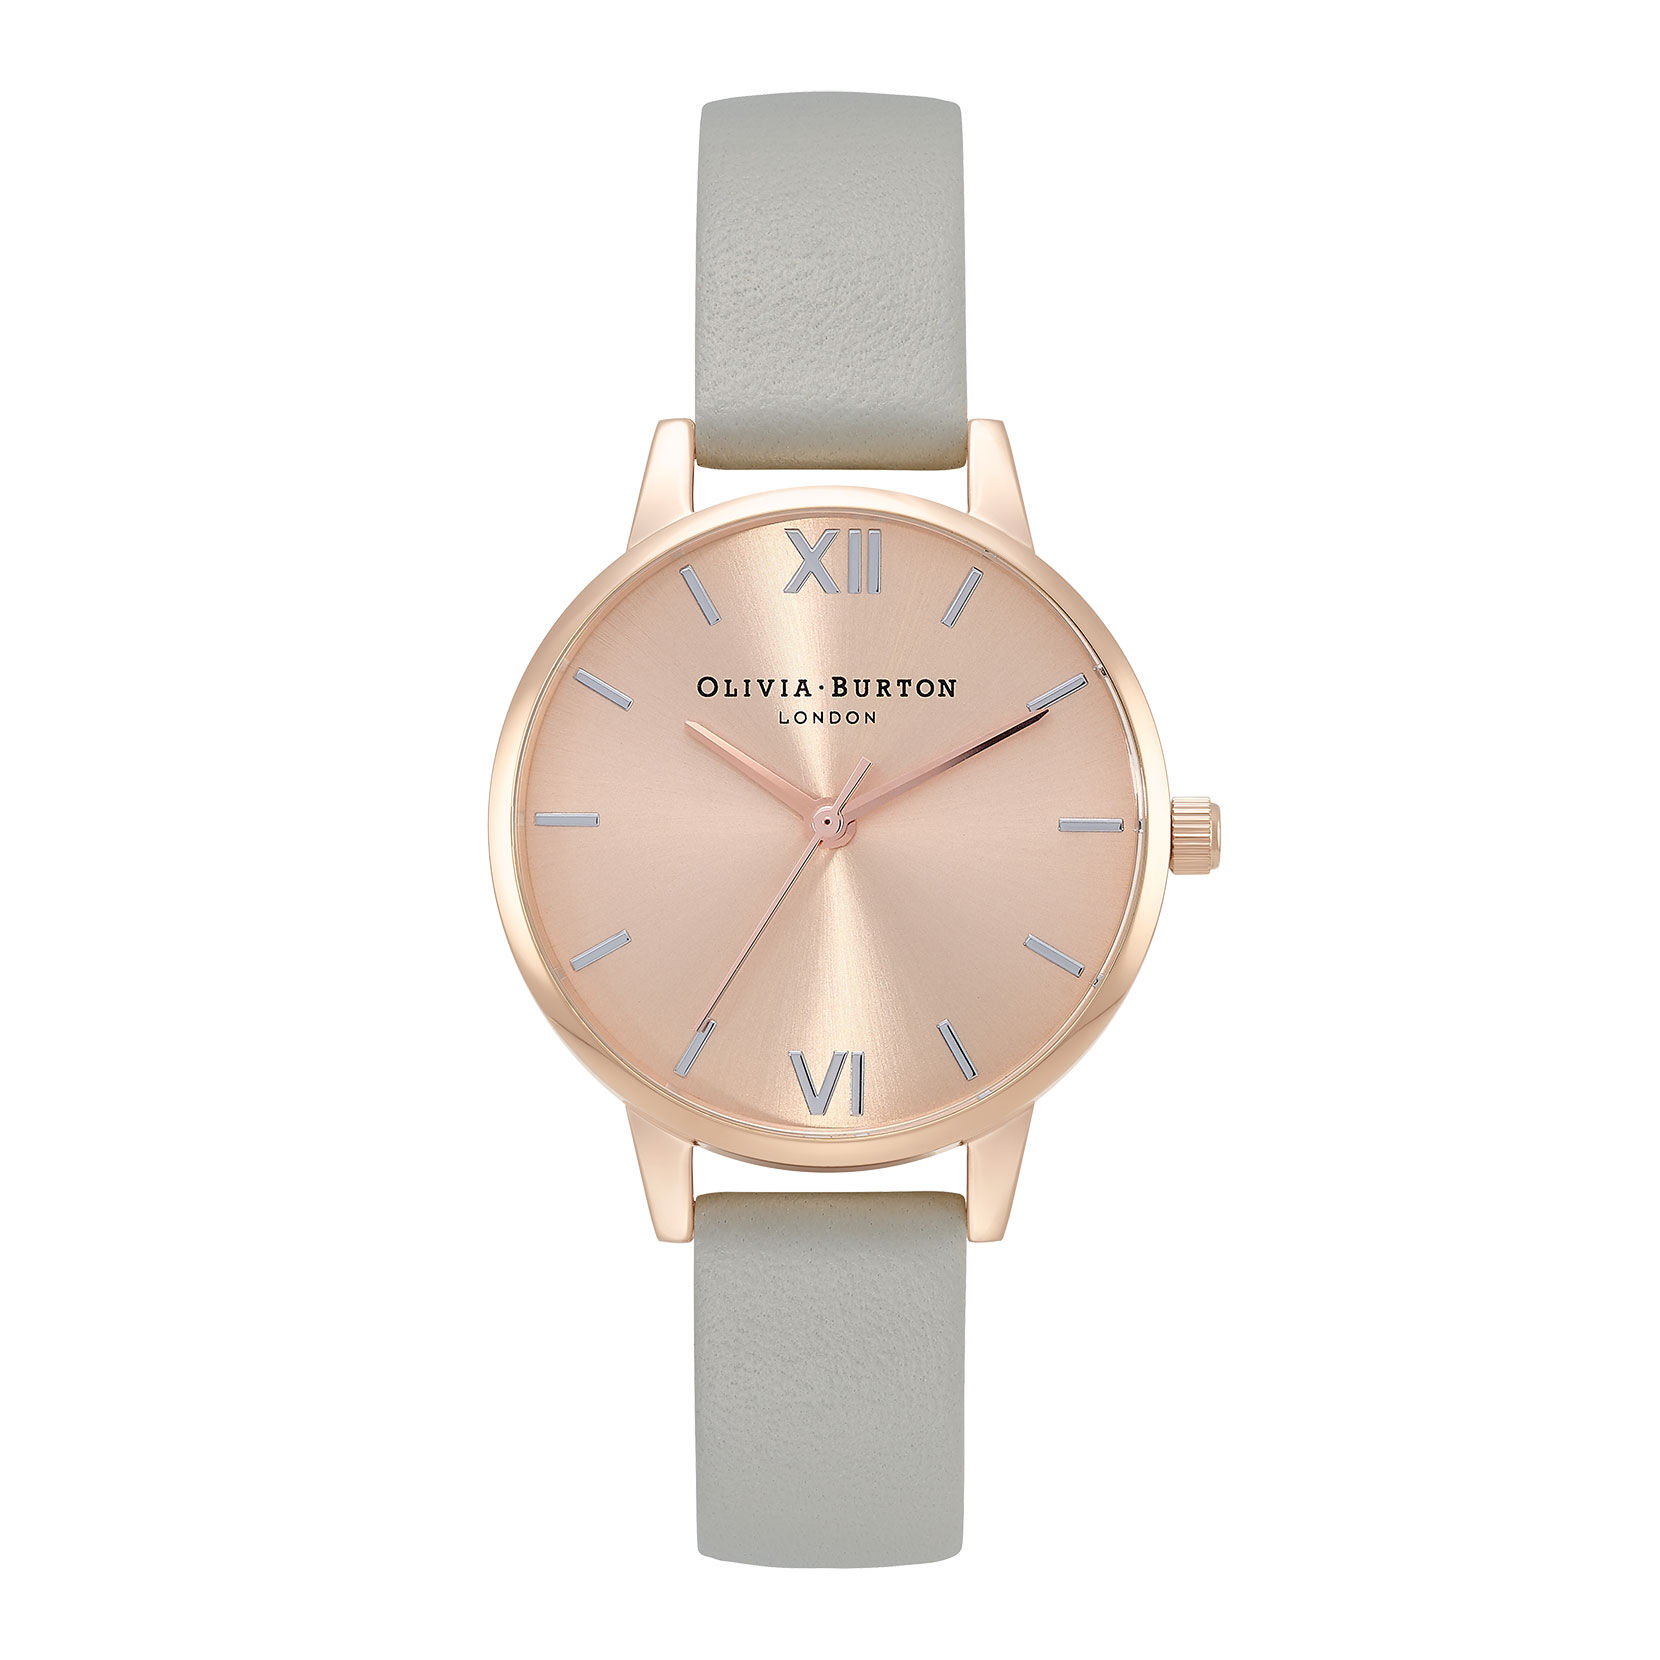 The England  30mm Rose Gold & Grey Leather Strap Watch